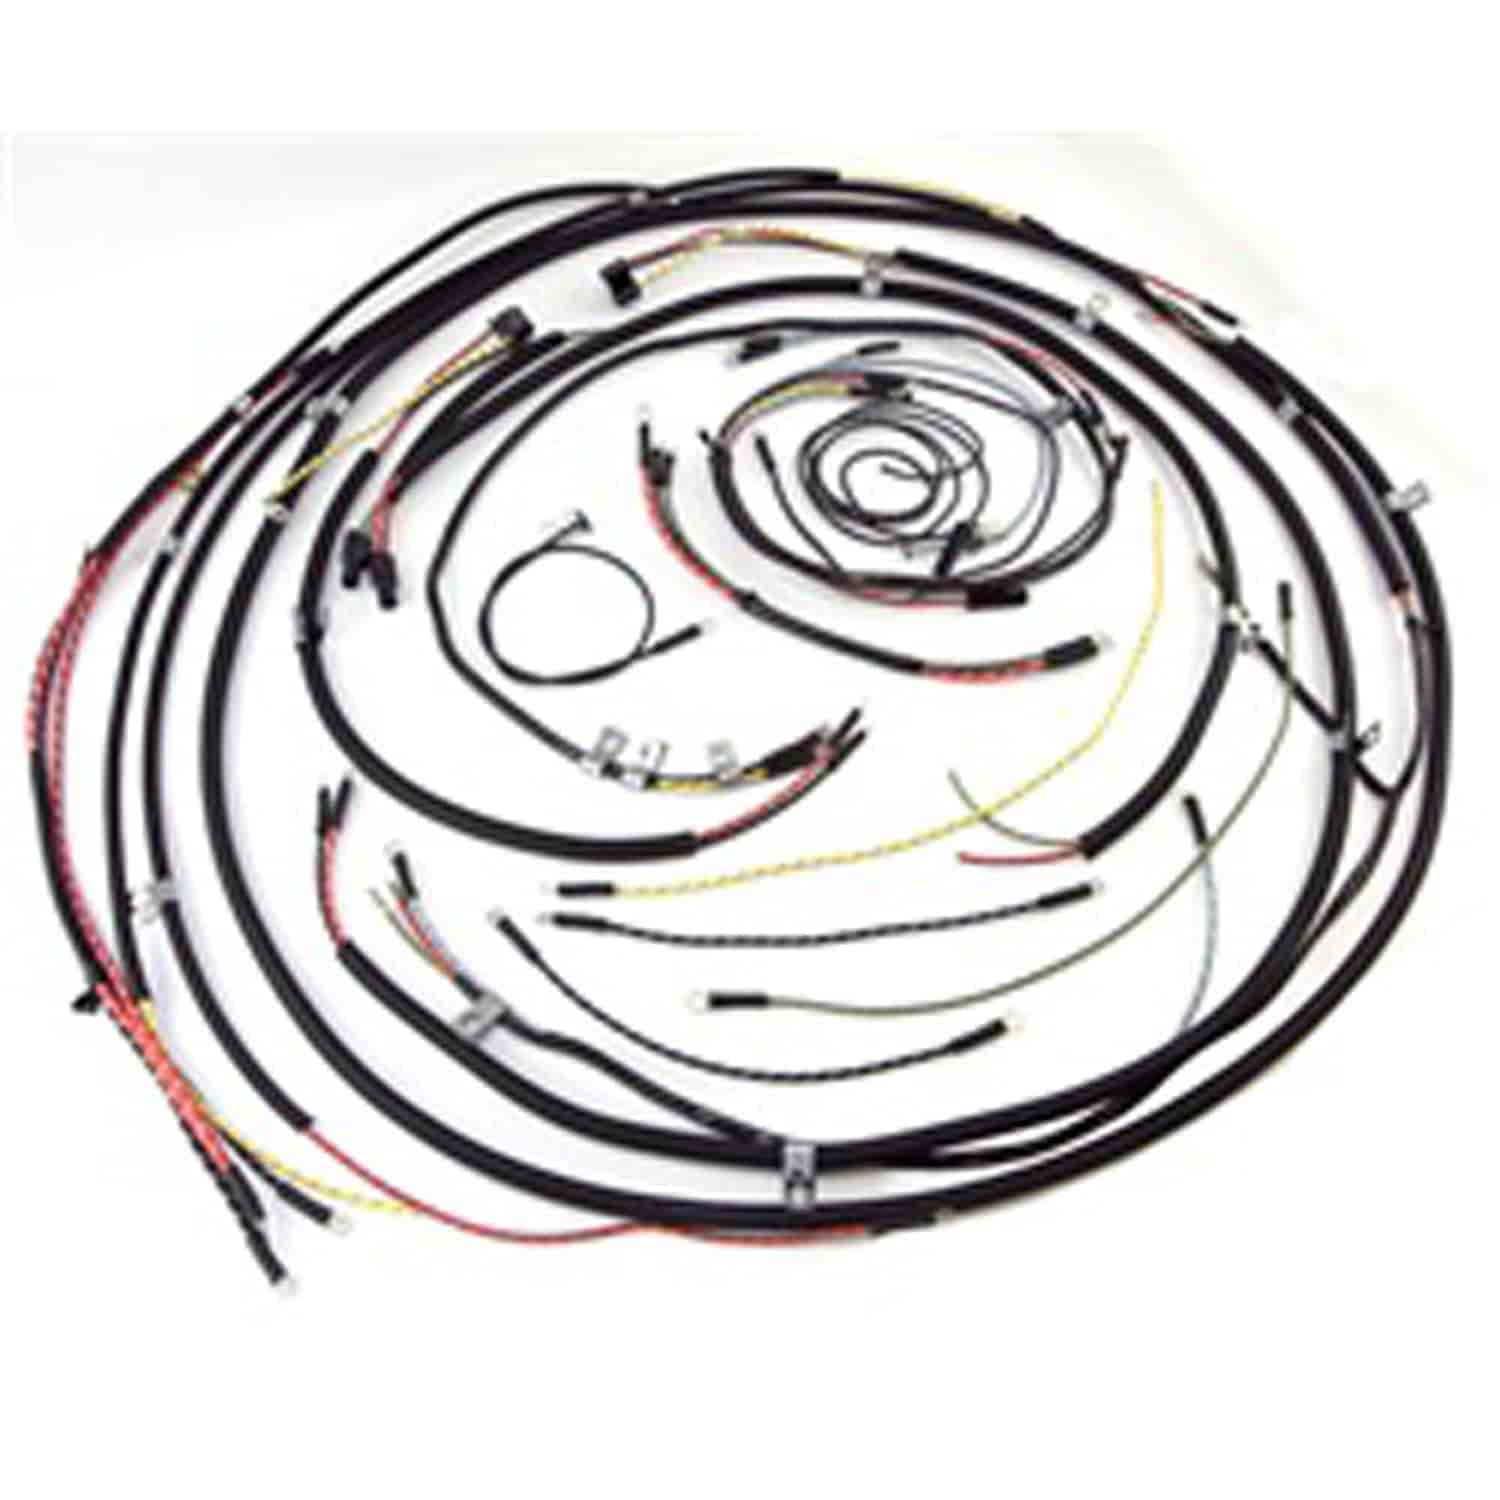 Complete Wiring Harness Horn on Firewall Without Turn Signals 1945-1946 CJ2A